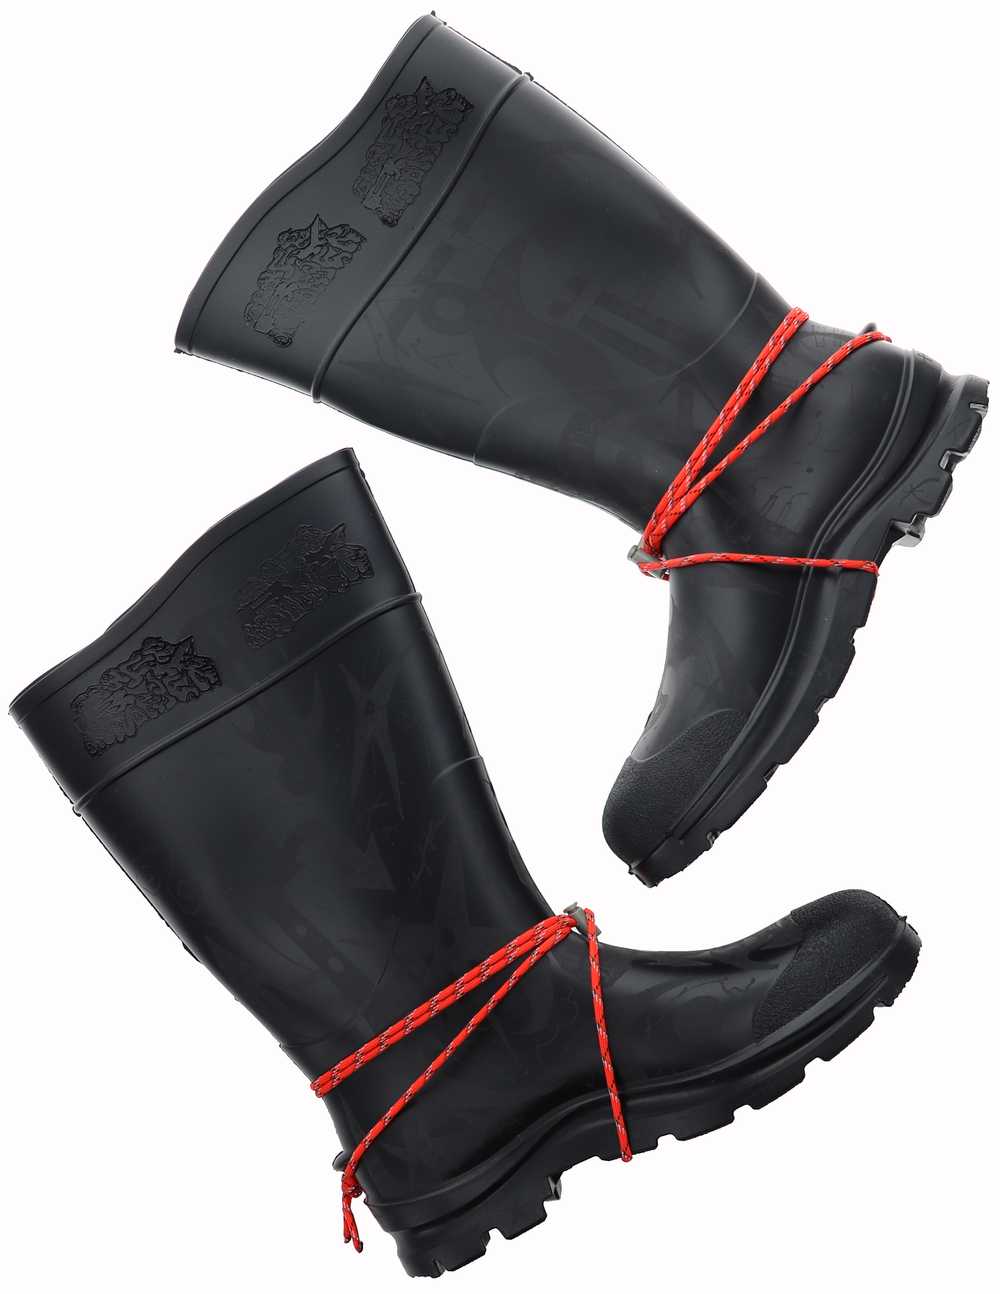 OrderByDisorder 1/1 Engraved Rubber Boots - image 3